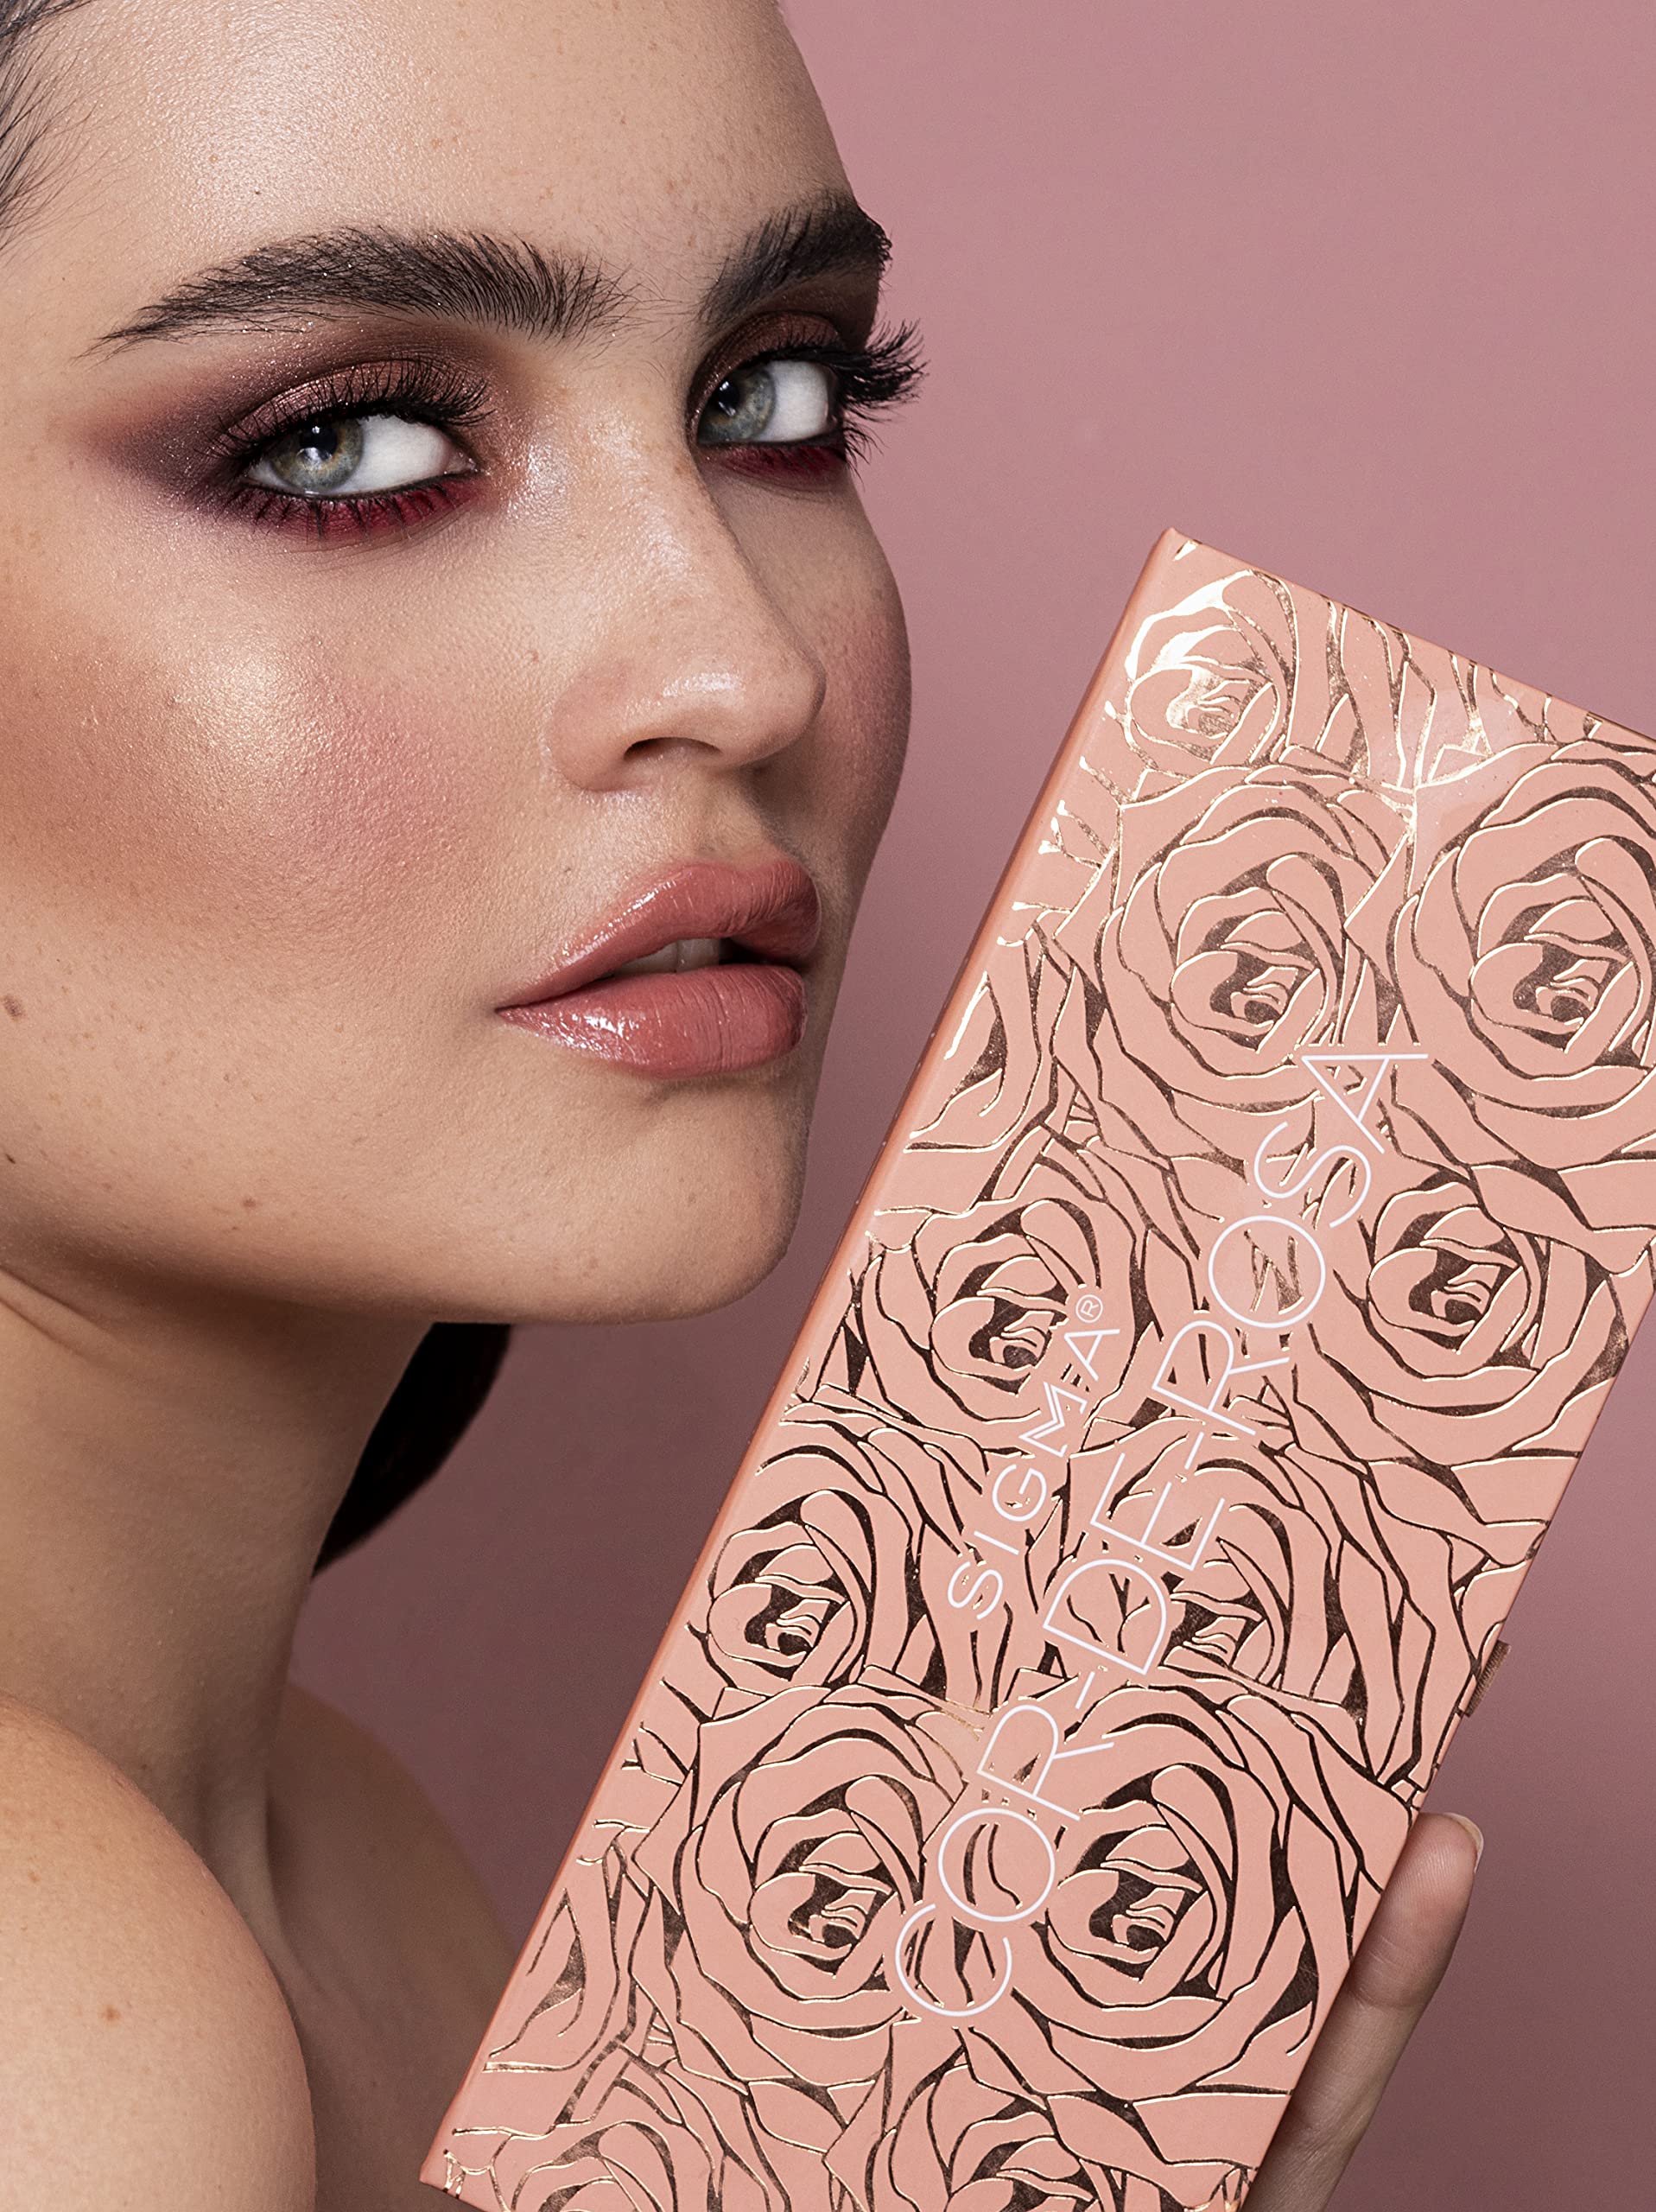 Sigma Beauty Cor-De-Rosa Eyeshadow Palette - 14 Warm Eyeshadow Shades in Matte, Shimmer and Metalic Finishes - Highly Pigmented Vegan Eye Makeup Palette - Clean Beauty Products